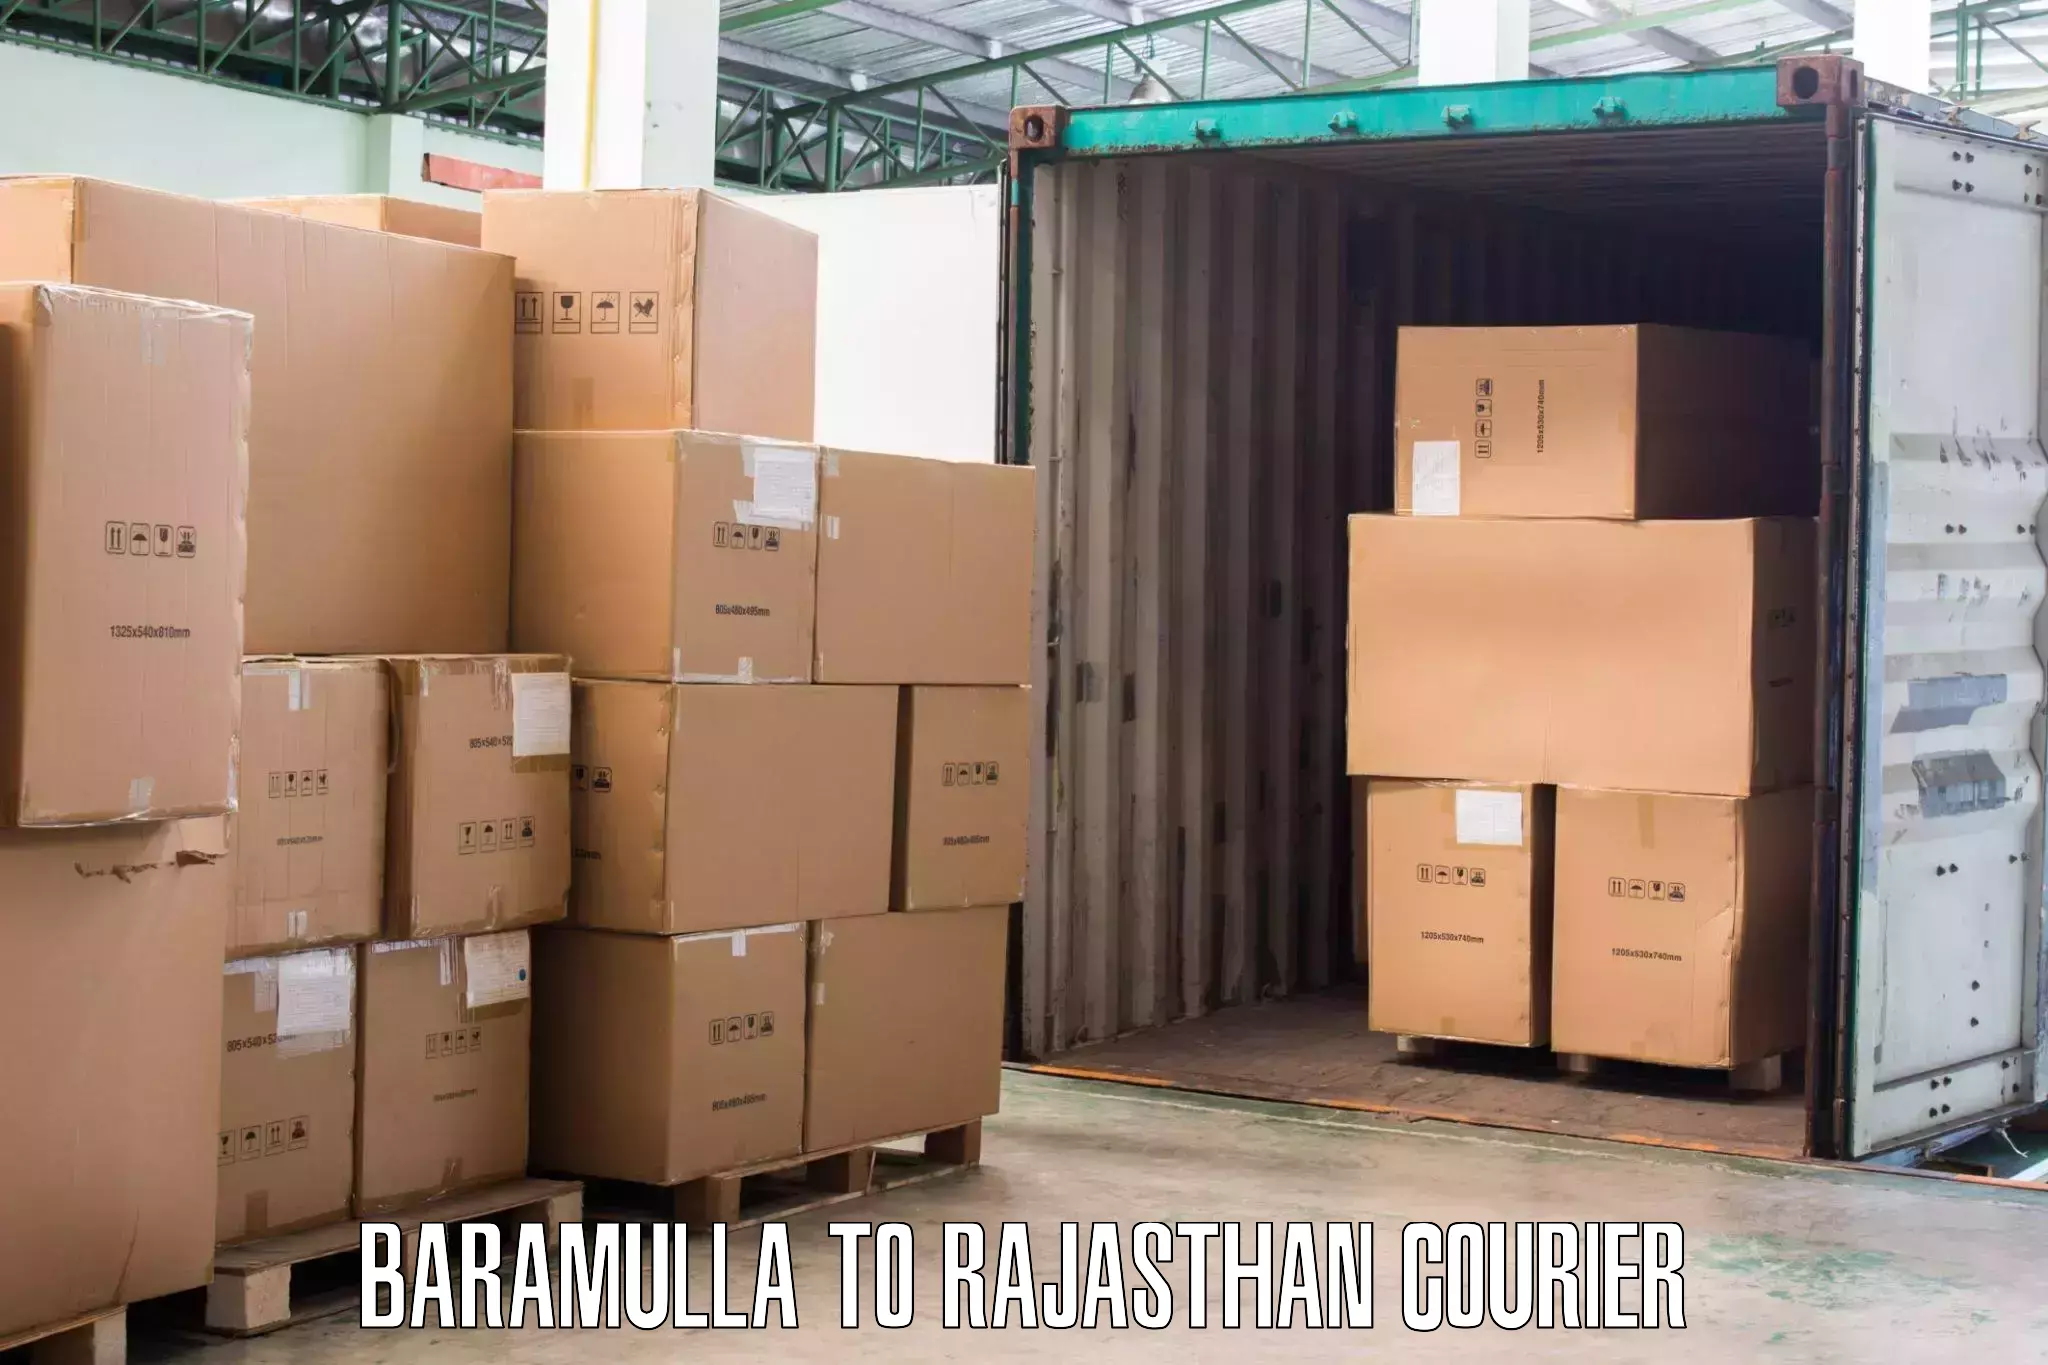 Trusted relocation experts Baramulla to Bissau